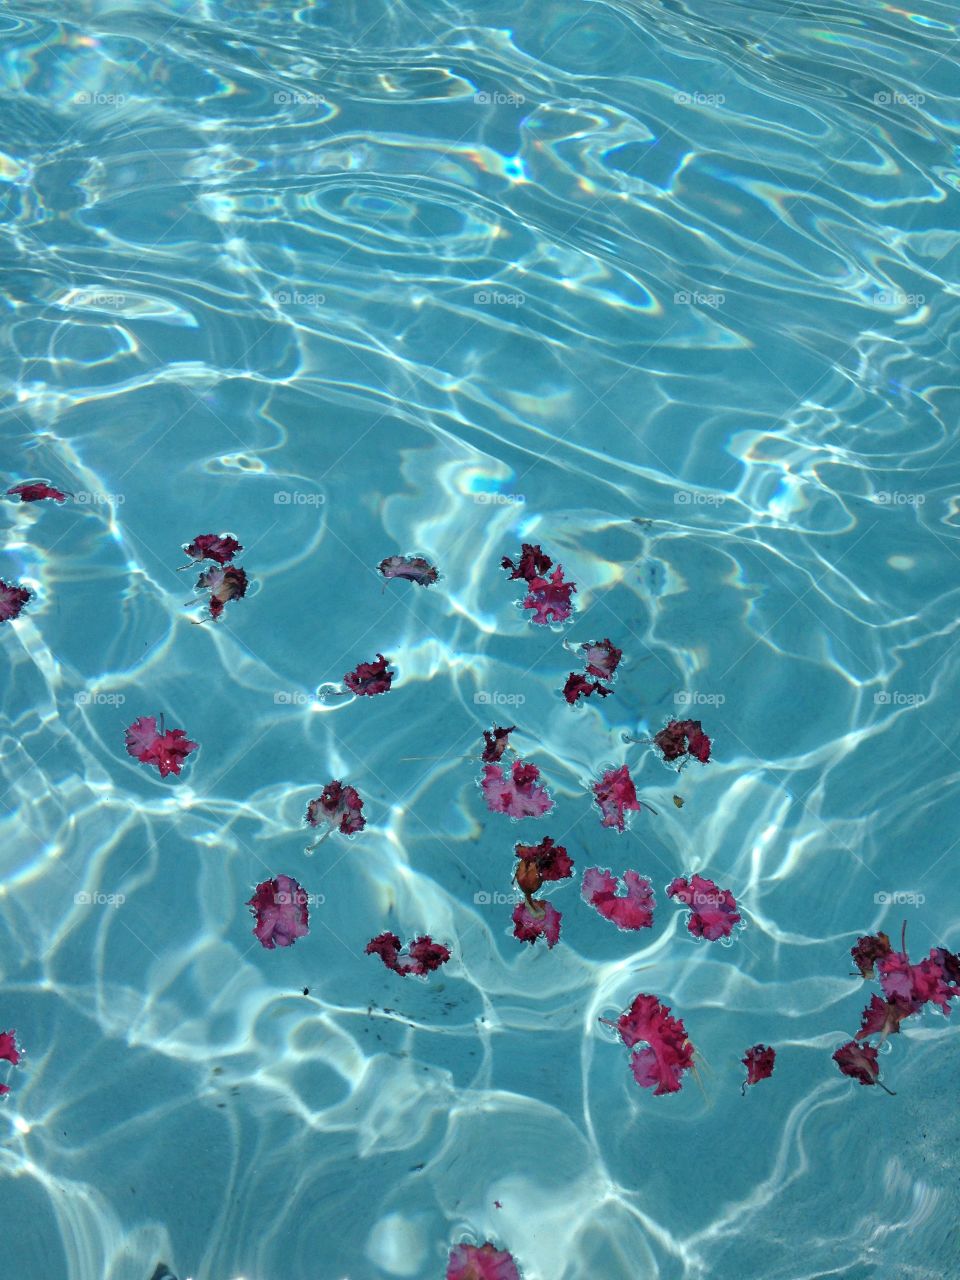 Falling for Summer. Crepe myrtle petals in the pool water